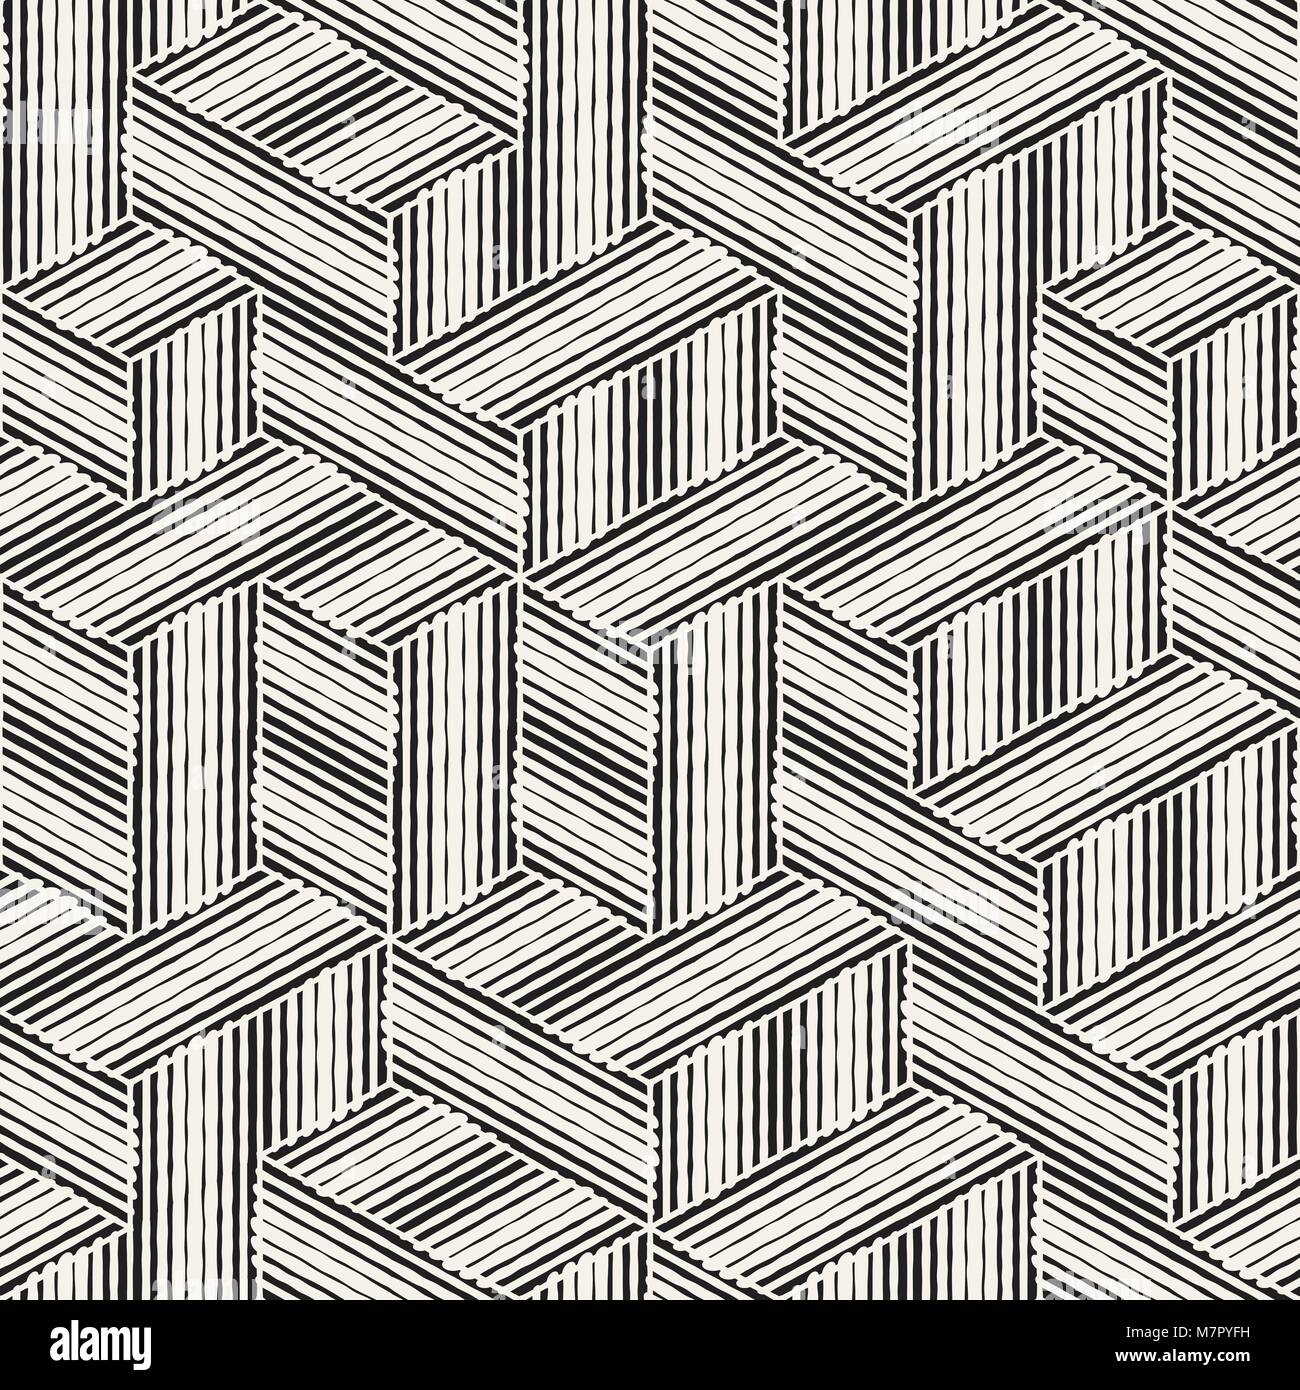 Seamless abstract hand drawn pattern. Vector freehand lines background texture. Ink brush strokes geometric design. Stock Vector